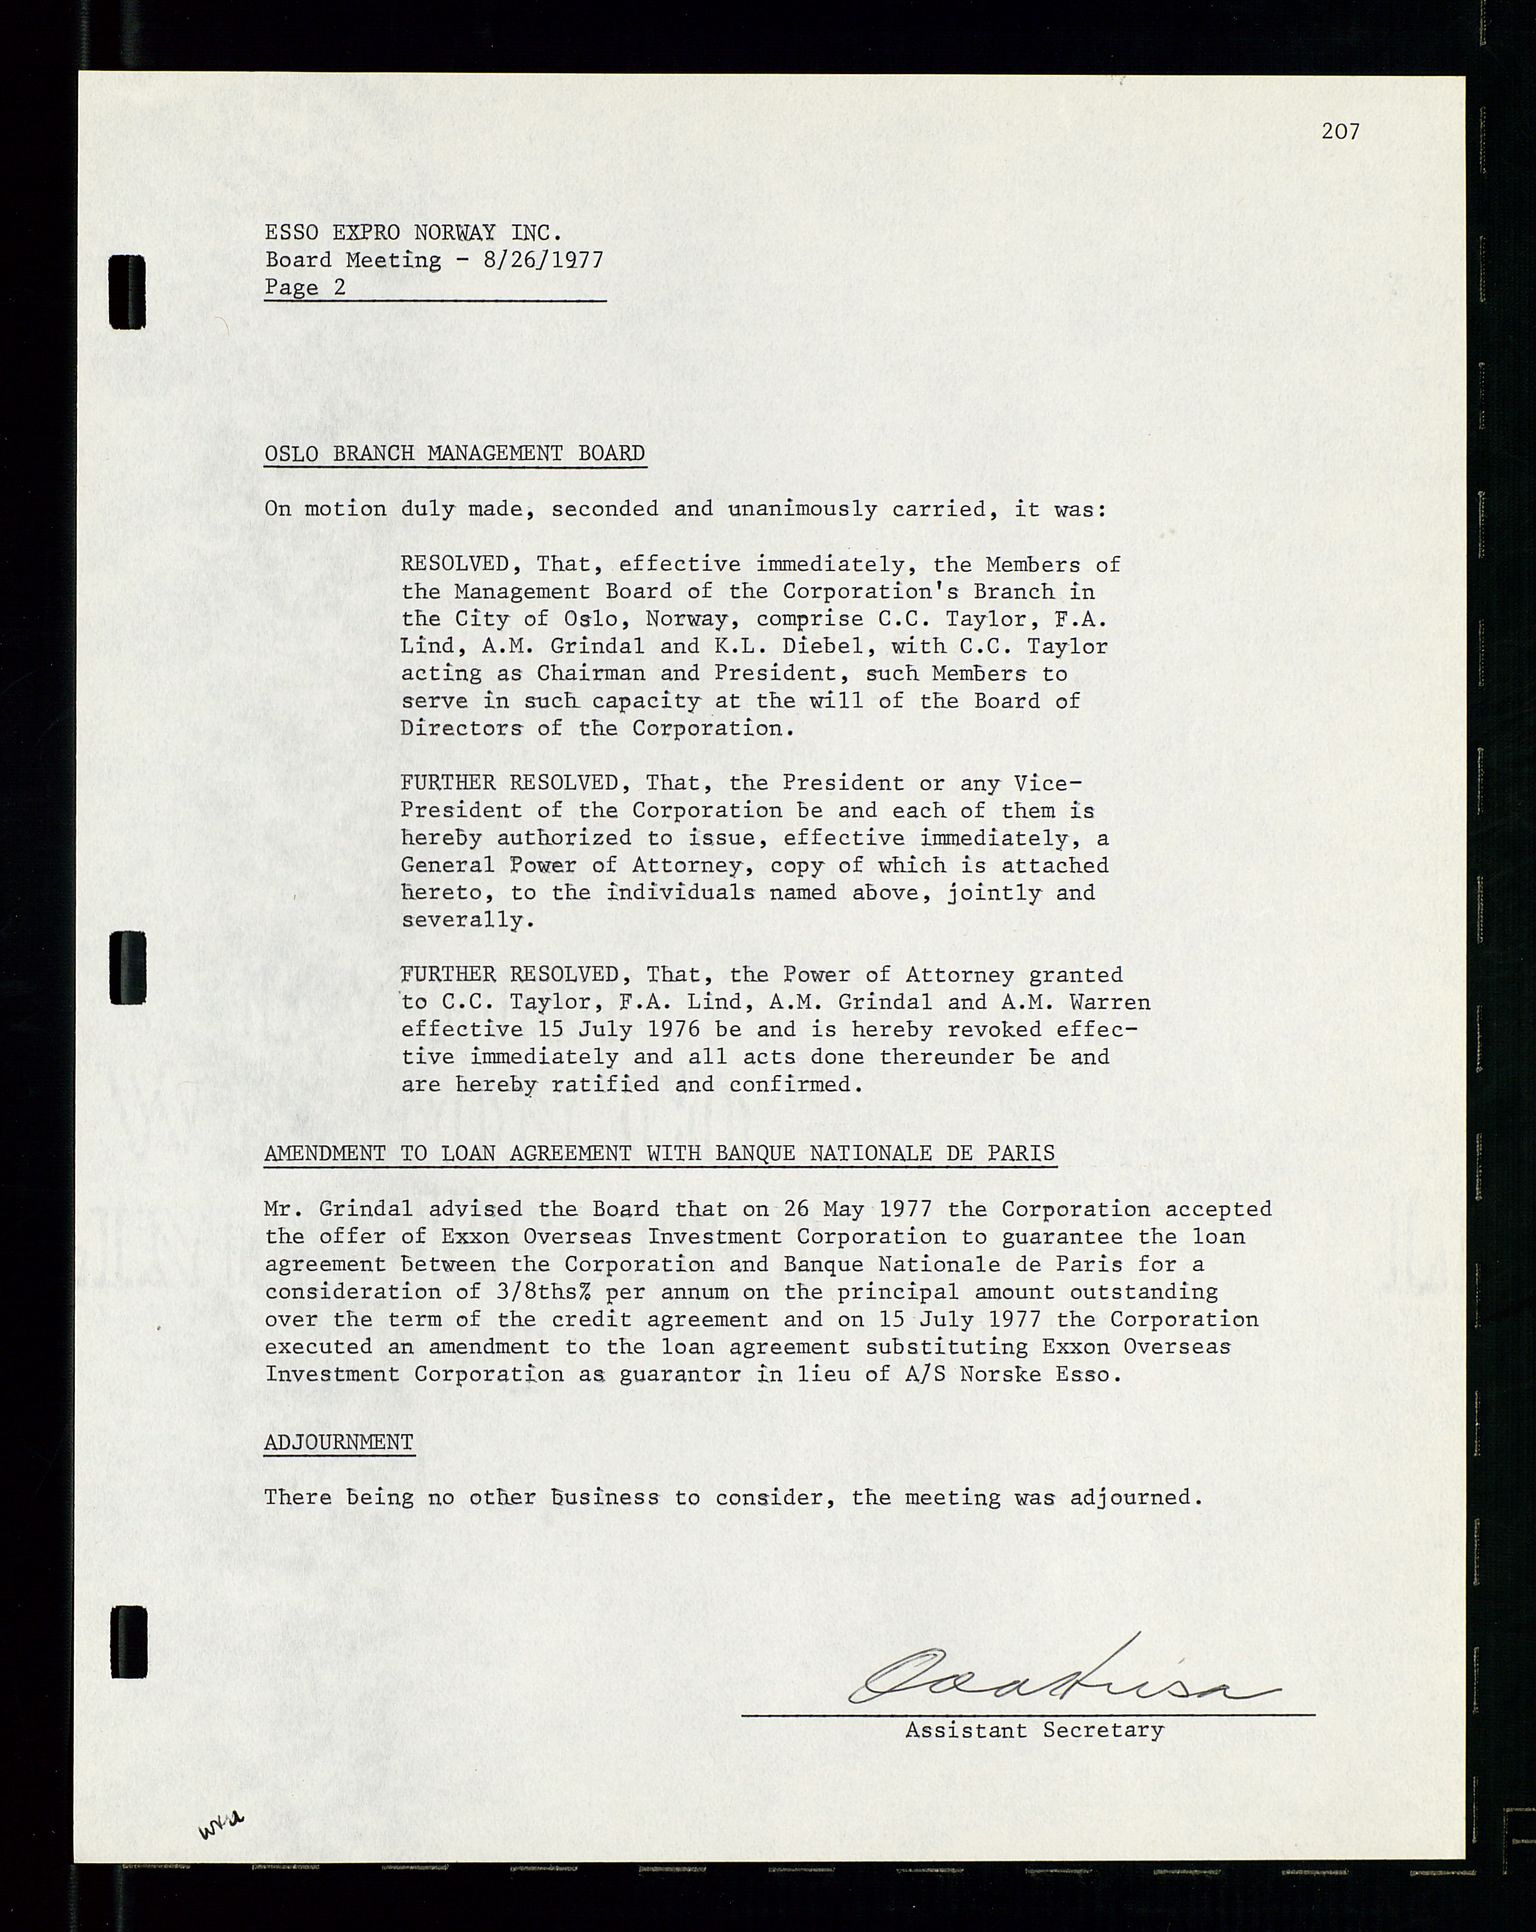 Pa 1512 - Esso Exploration and Production Norway Inc., SAST/A-101917/A/Aa/L0001/0002: Styredokumenter / Corporate records, Board meeting minutes, Agreements, Stocholder meetings, 1975-1979, s. 62